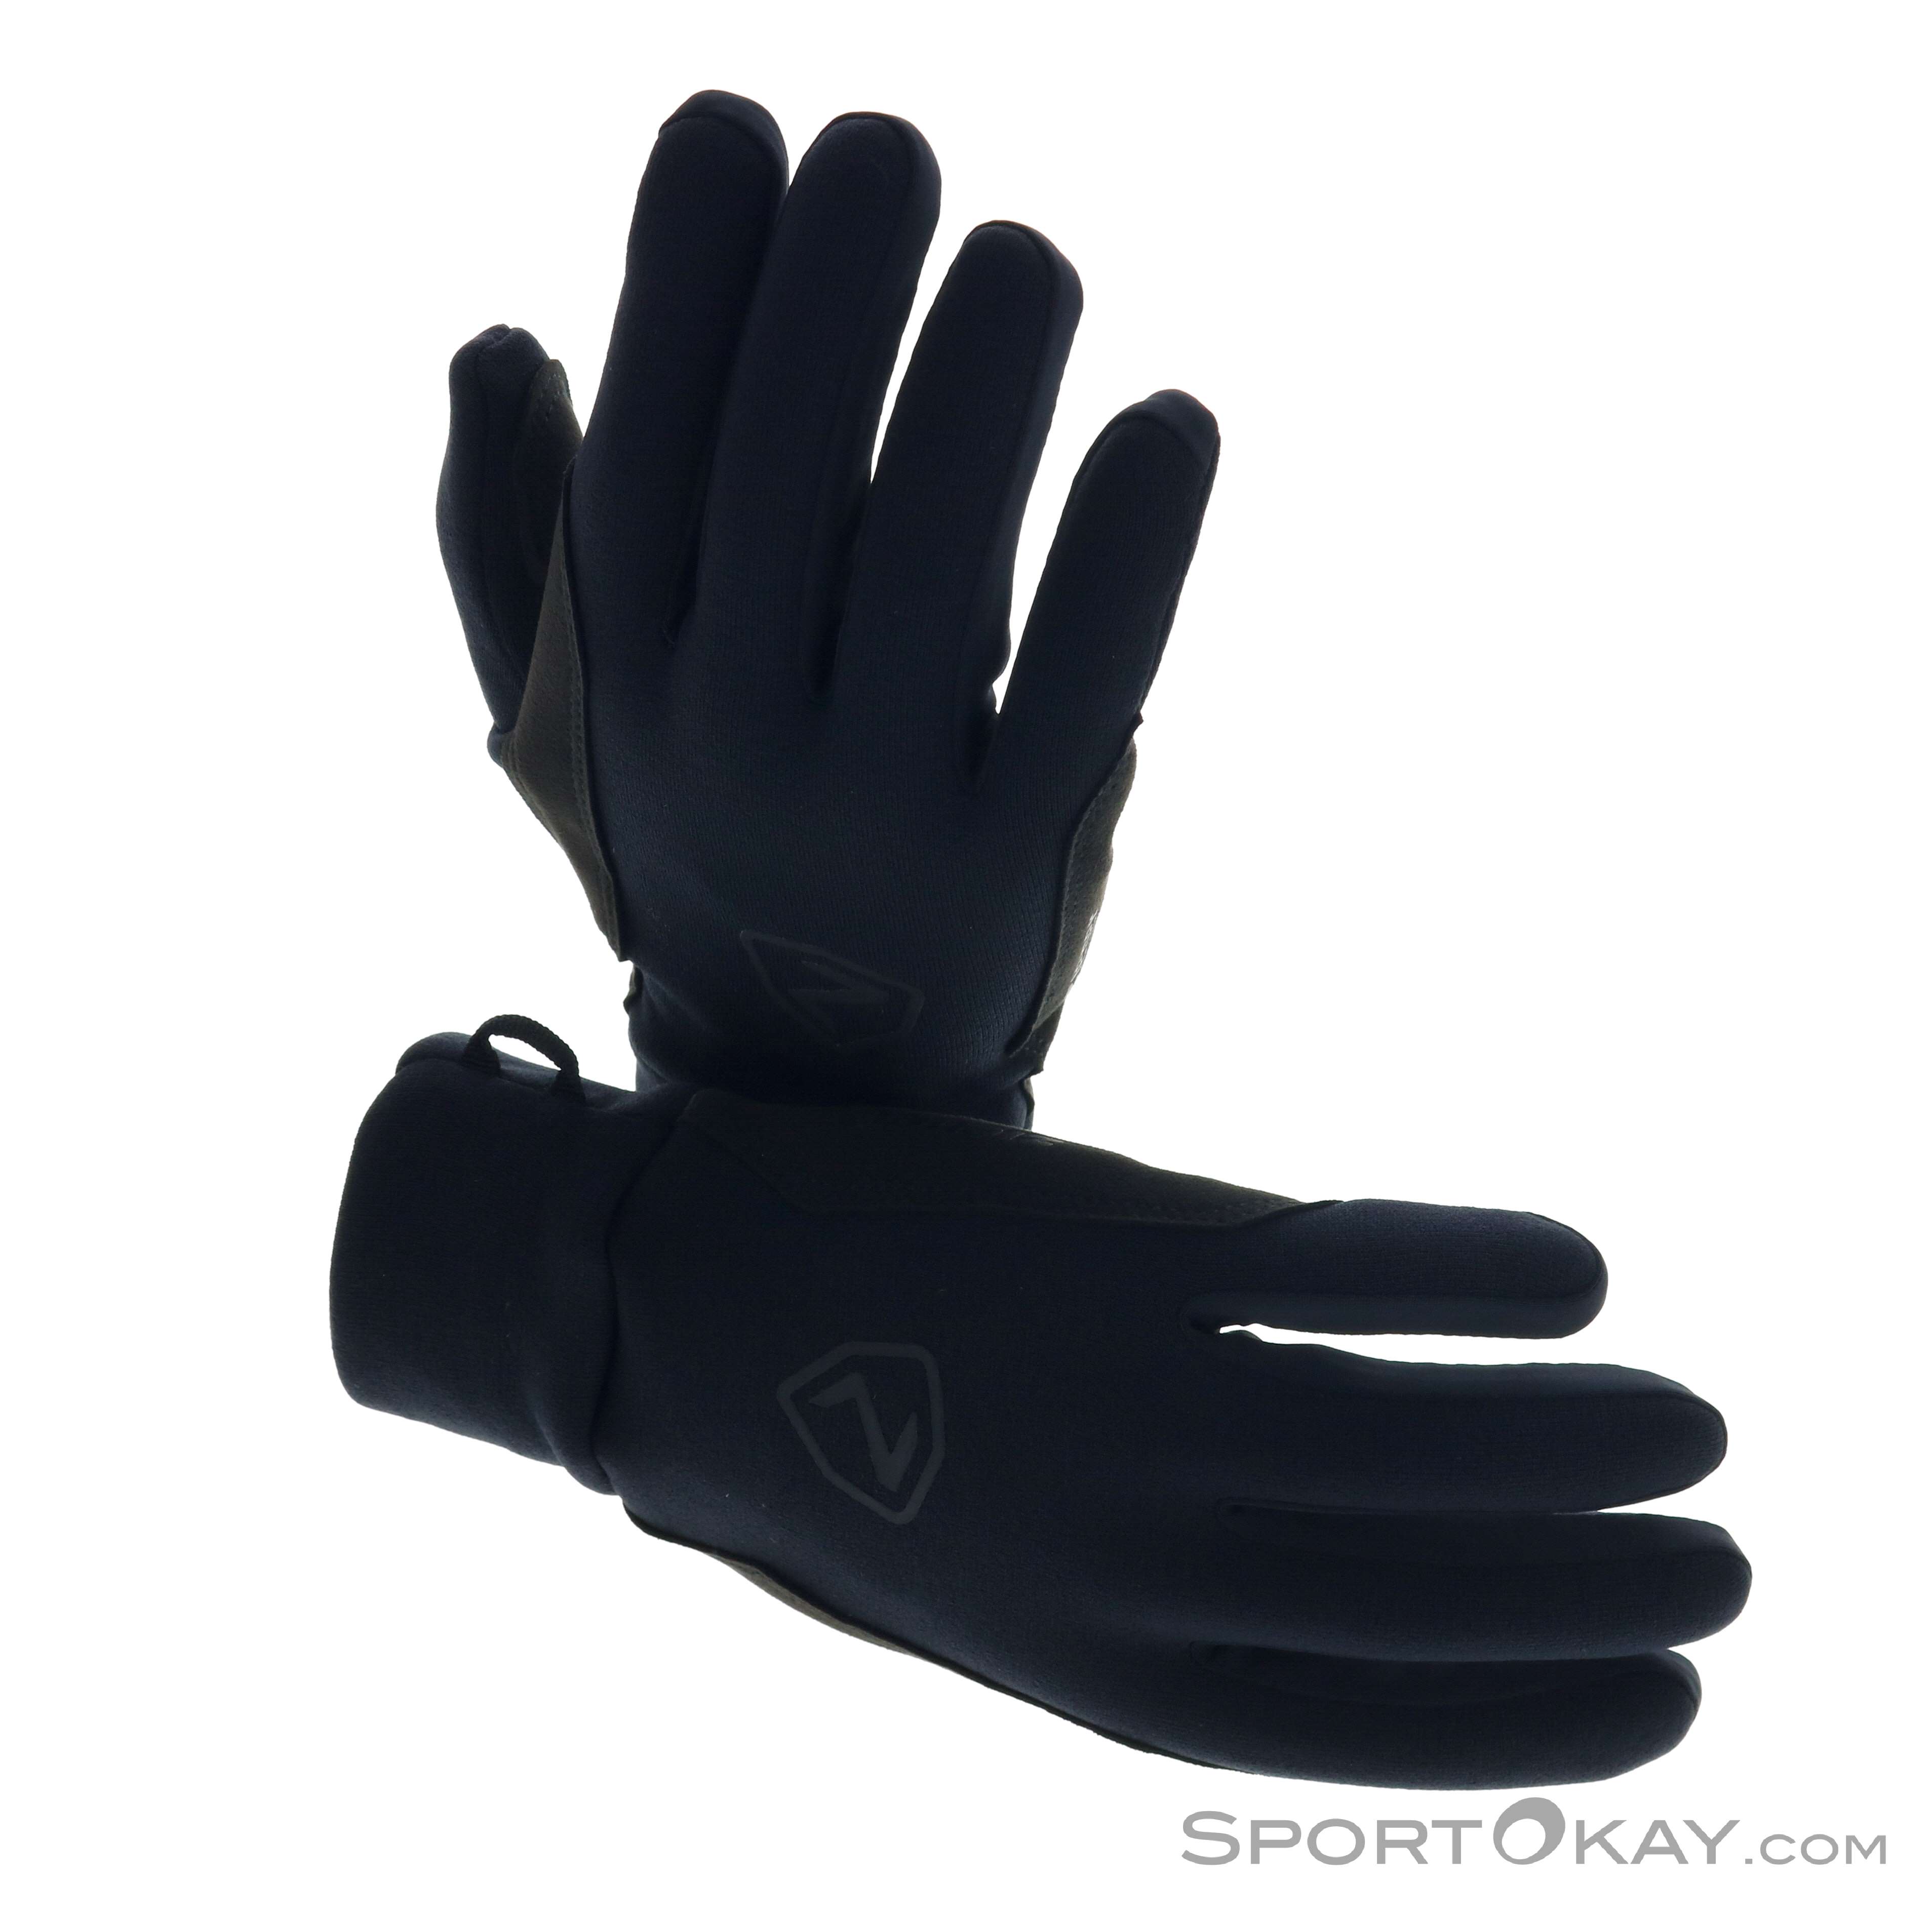 Outdoor Touch - All Gloves Outdoor Gusty Gloves Clothing Ziener - - -